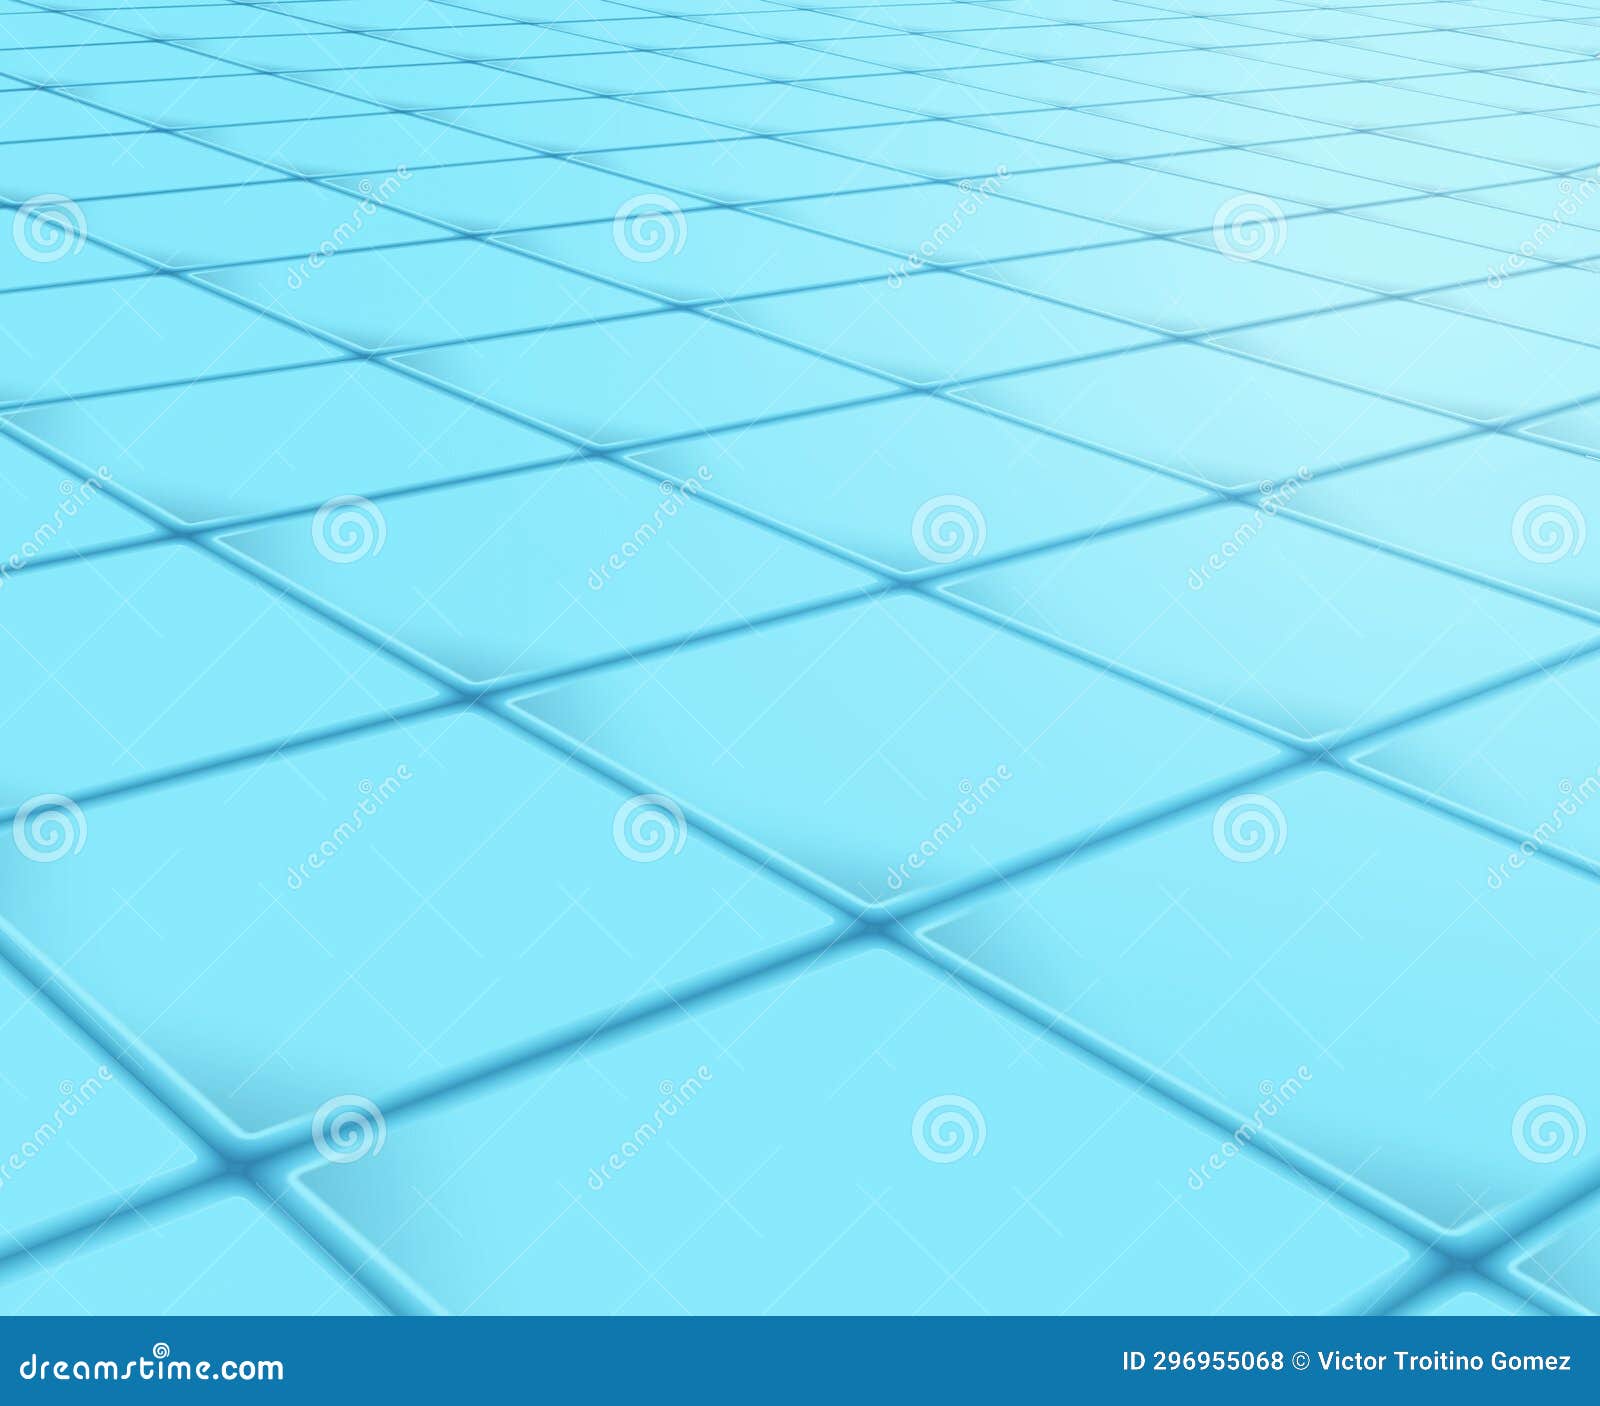 rendering reflective surface or floor made of square tiles